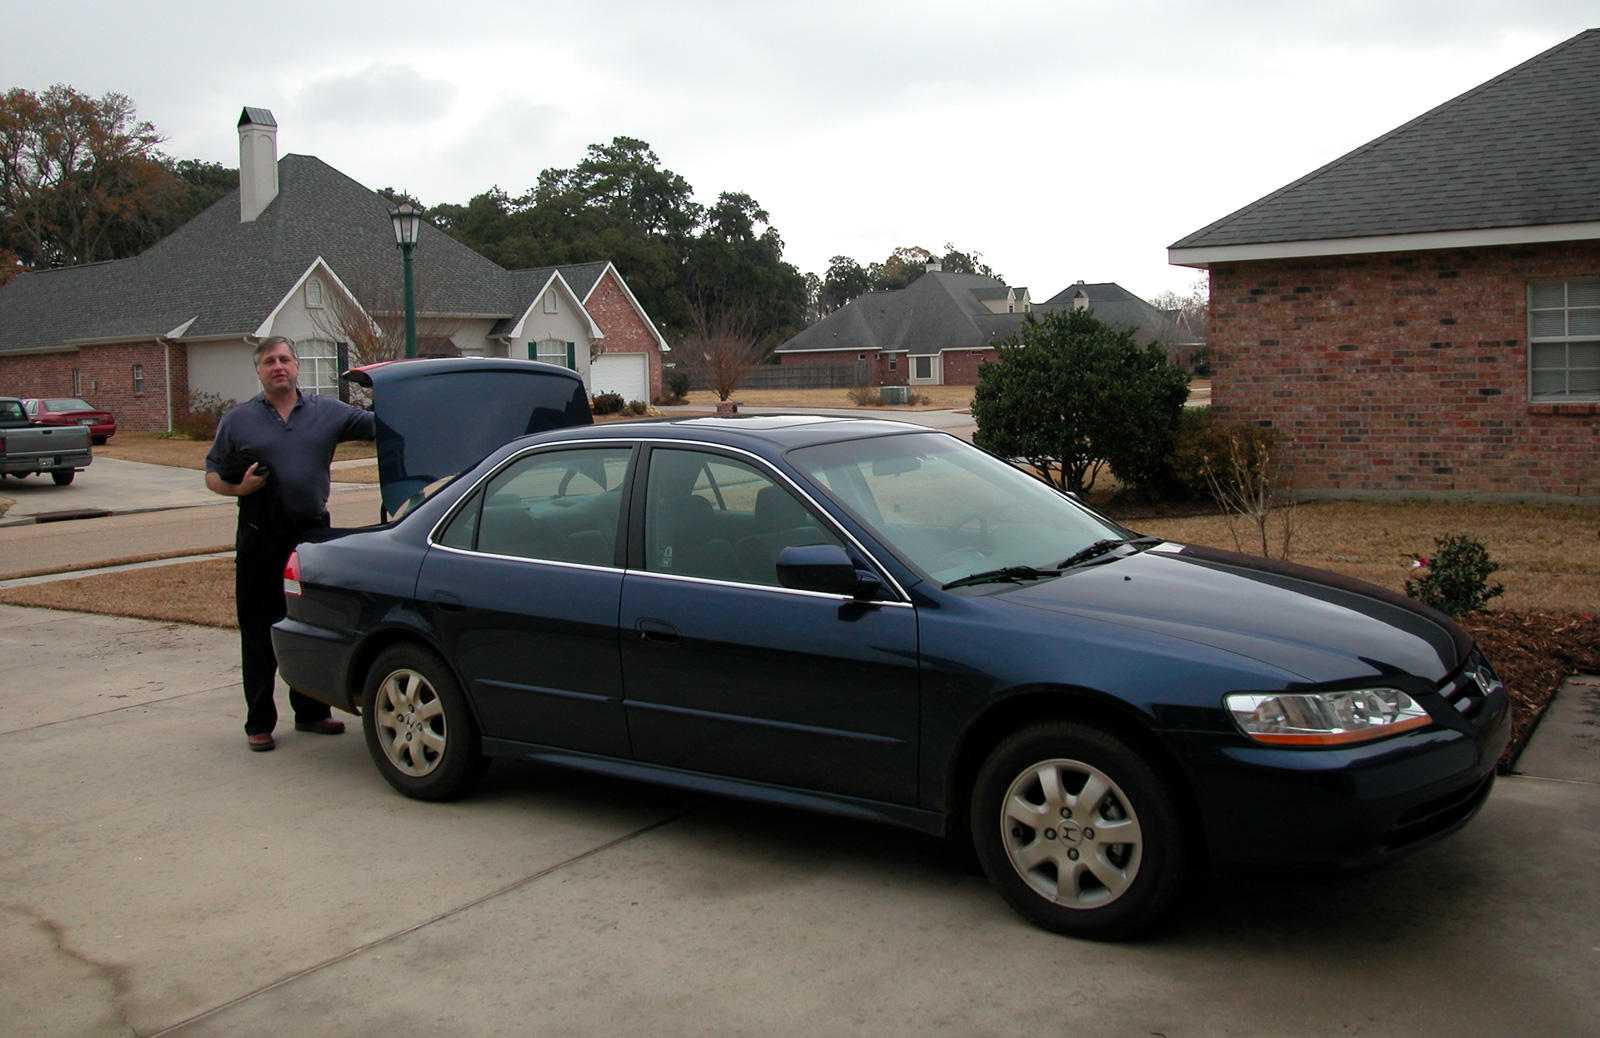 John Dempsey with his new Honda ACCORD® in Mom's driveway